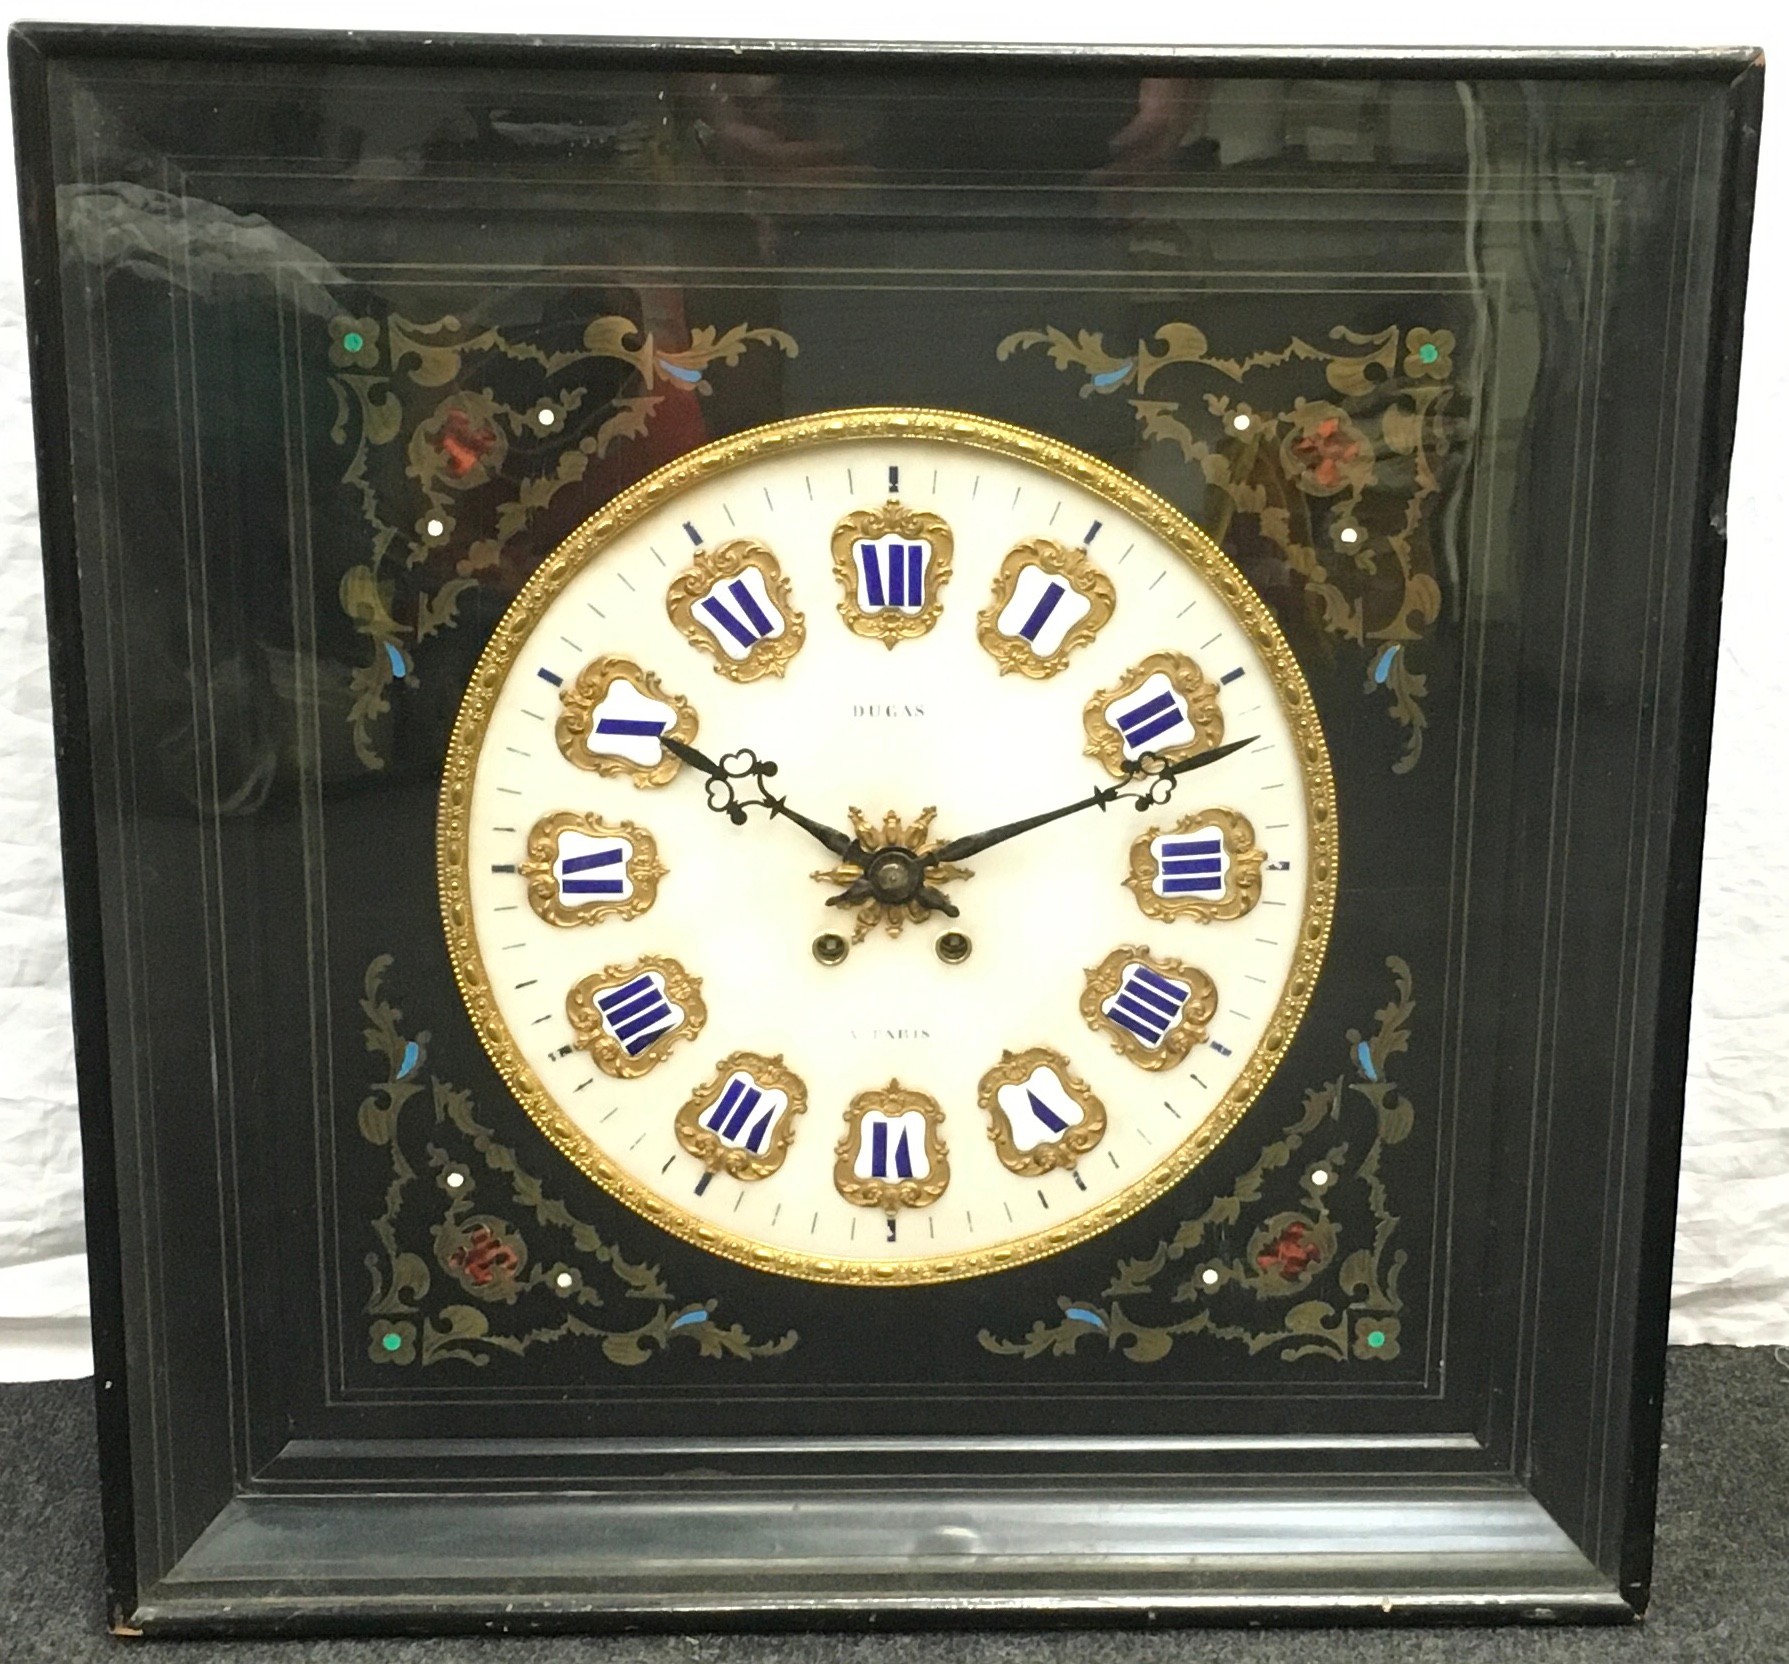 Quality wall clock with gilded enamel hour markers, signed Dugas a Paris to dial. Housed in a glazed